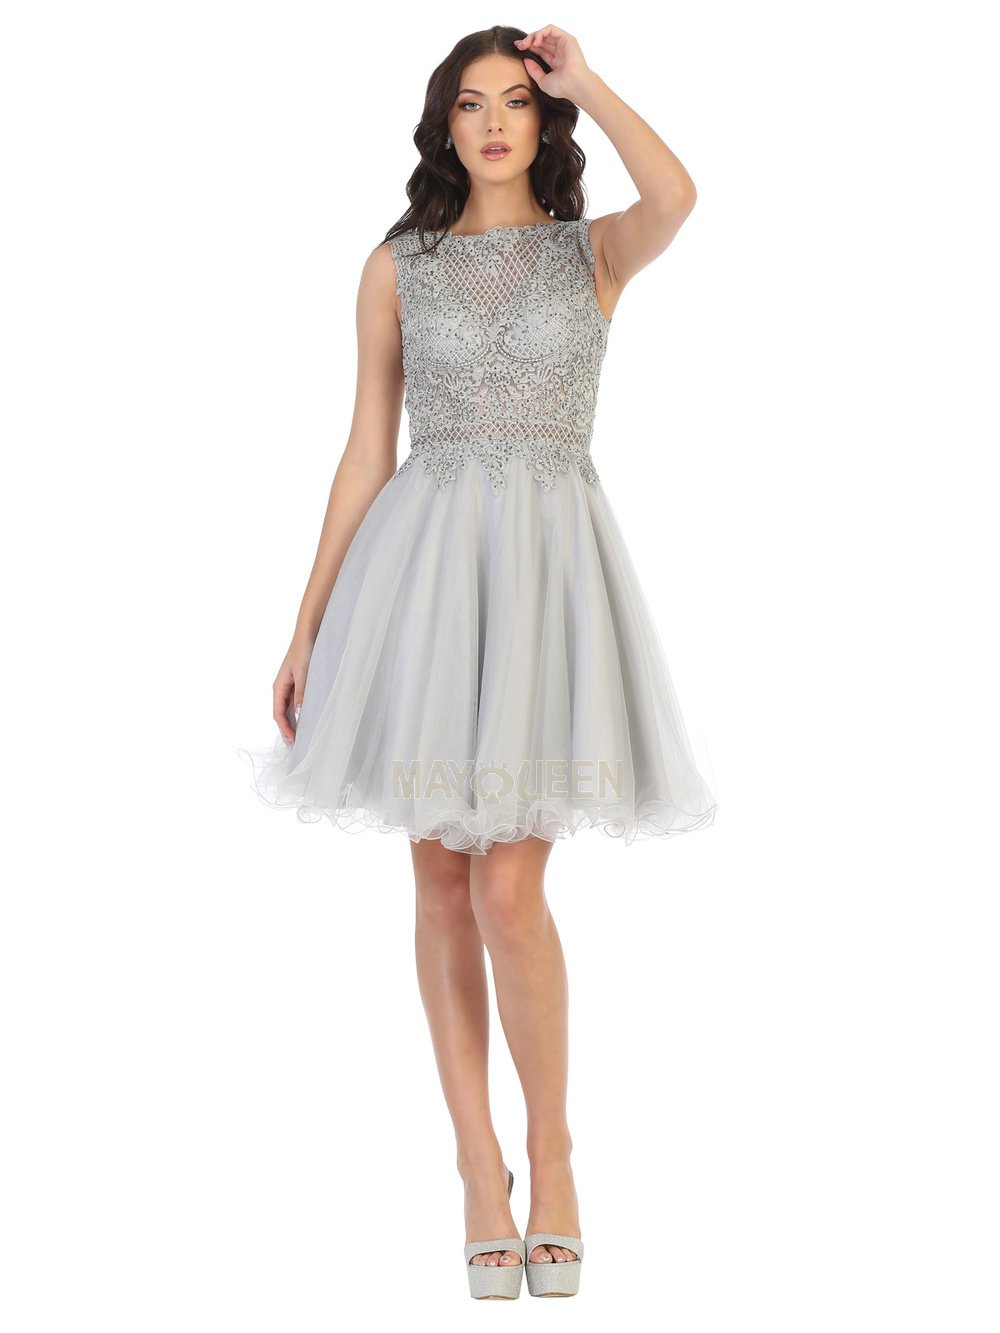 May Queen - MQ1751 Embroidered Bateau A-line Dress In Silver